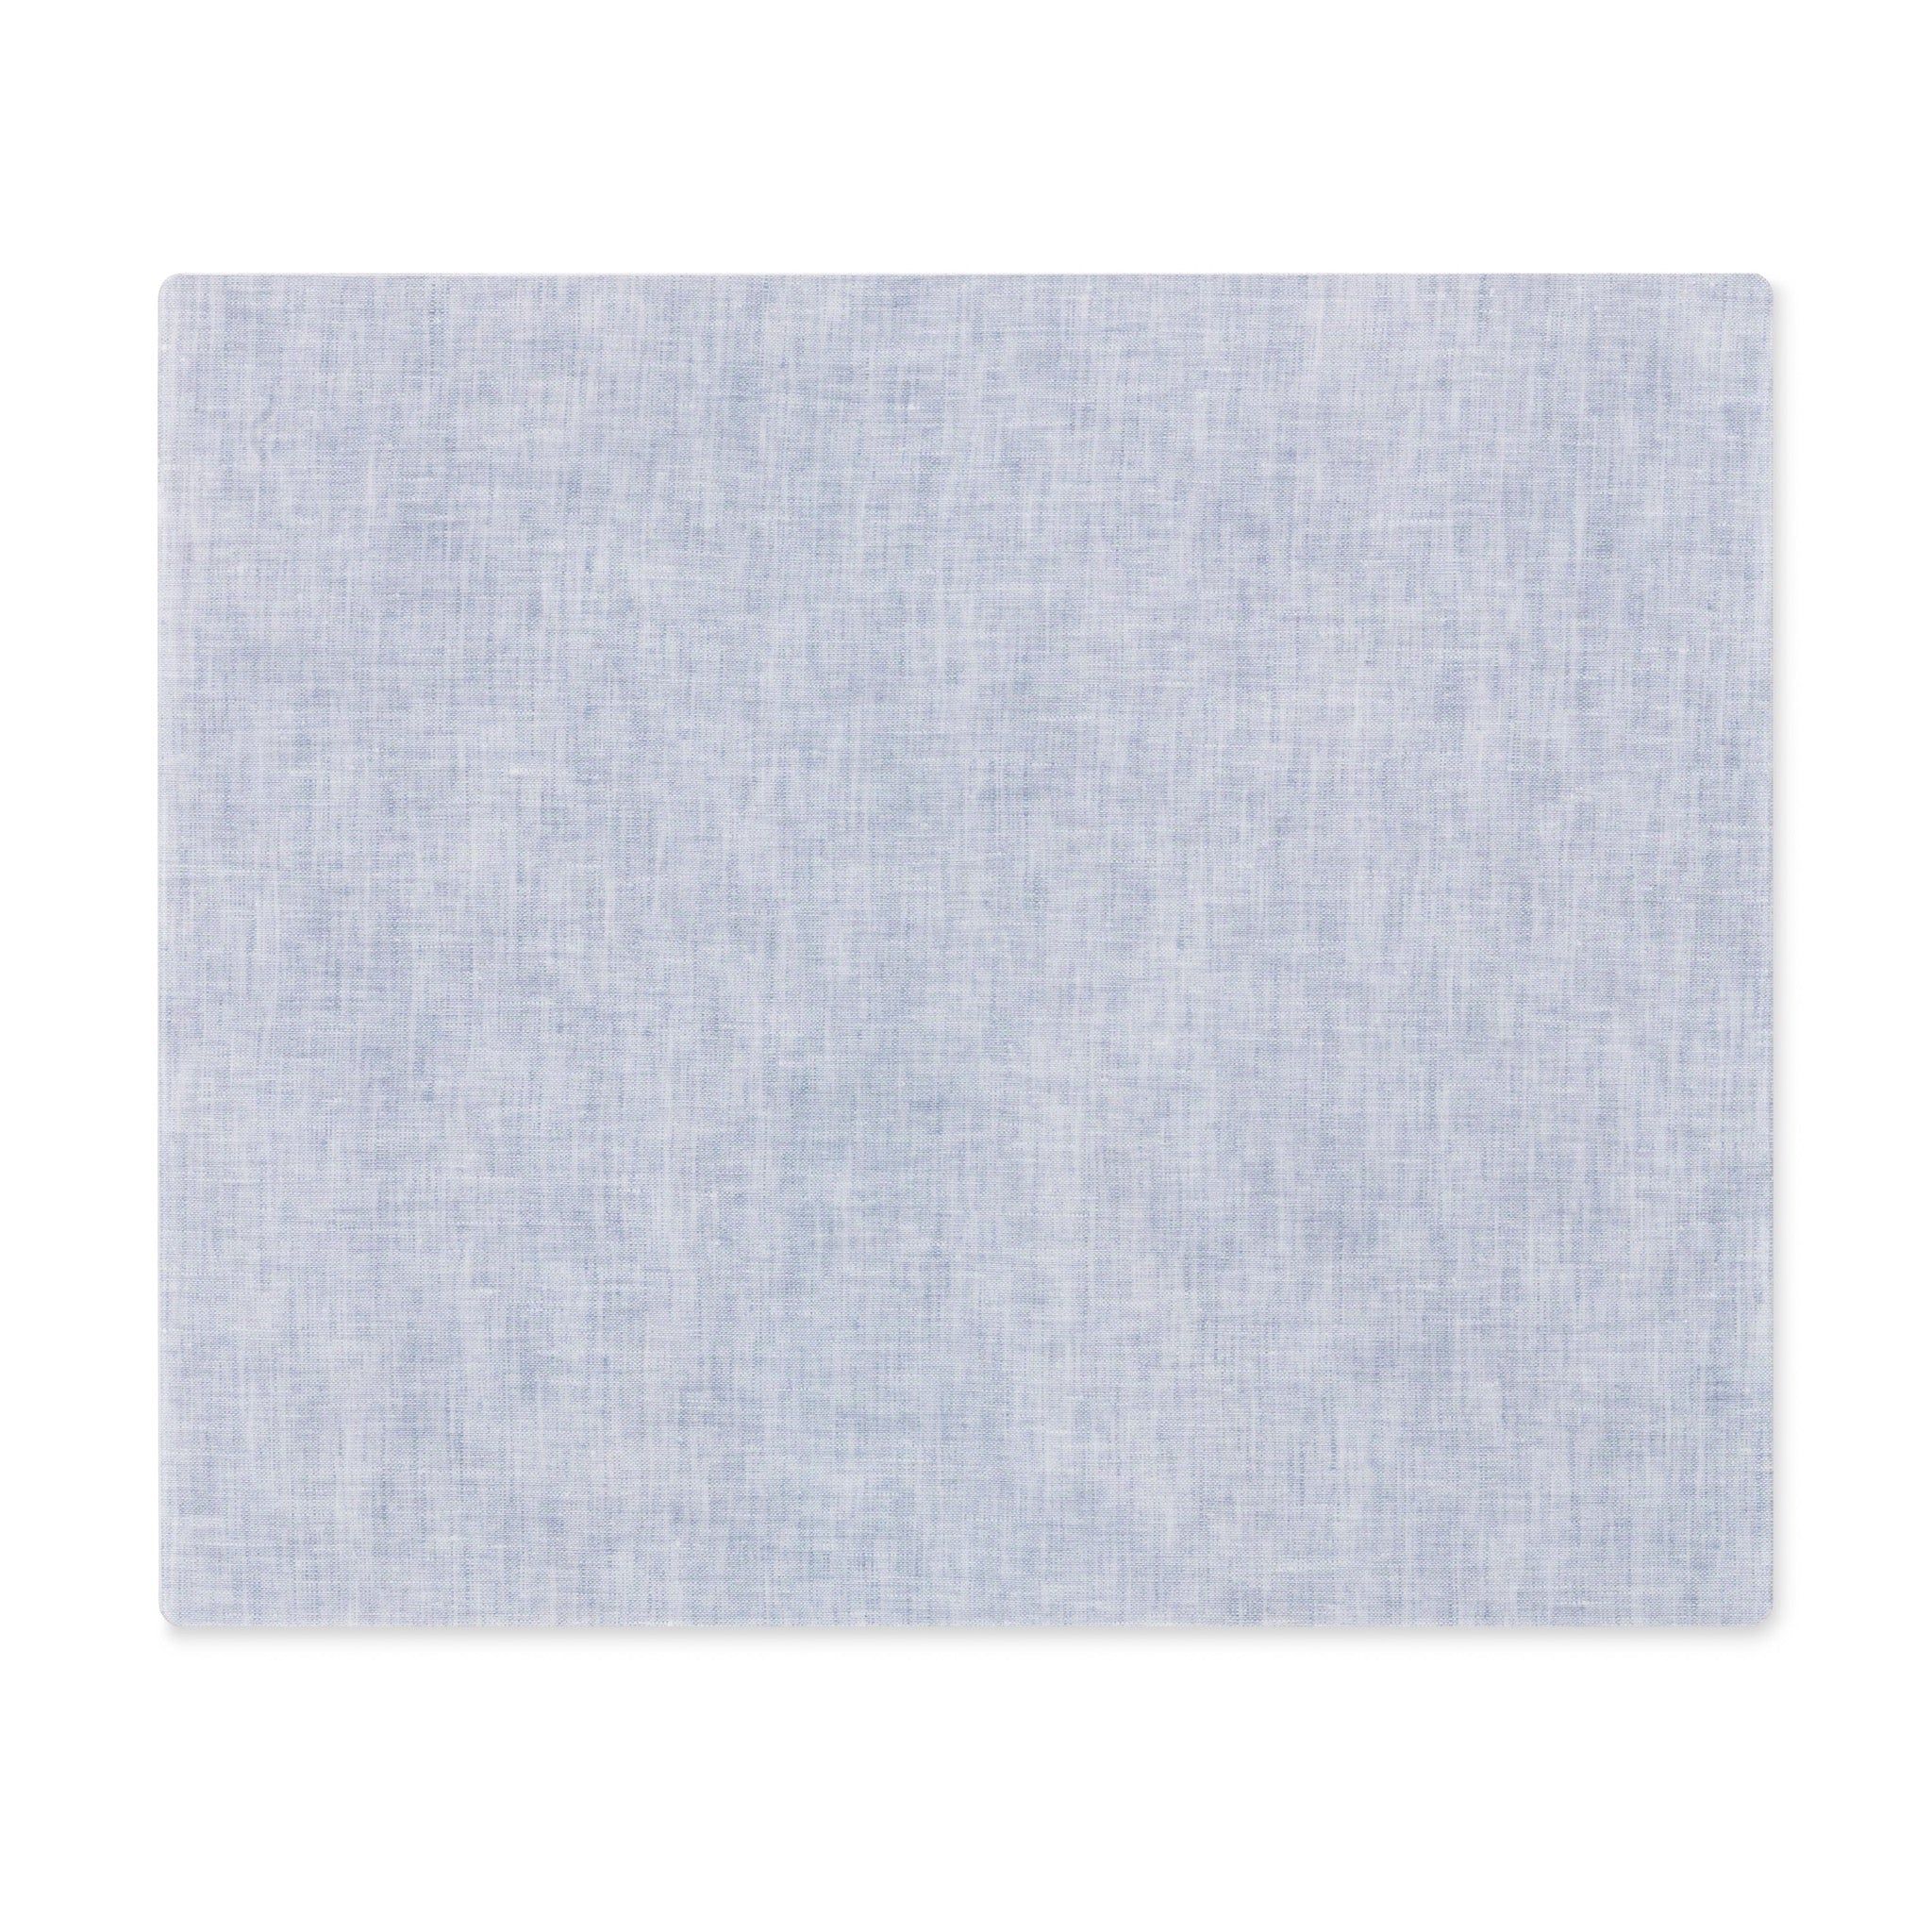 Stone Chambray Placemat | Proper Table Co.